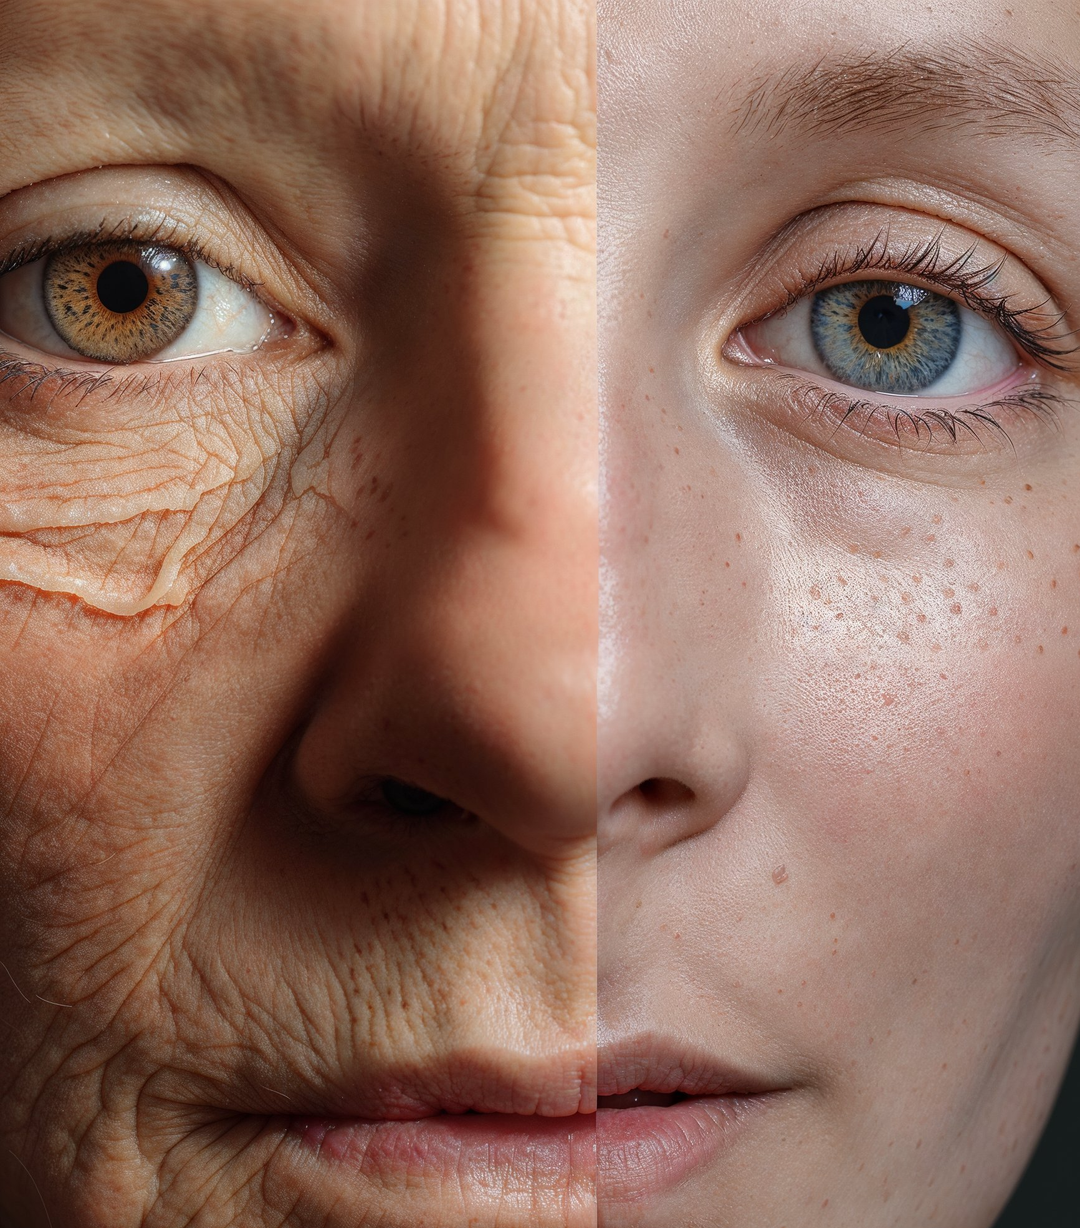 WHY DOES OUR SKIN AGE?